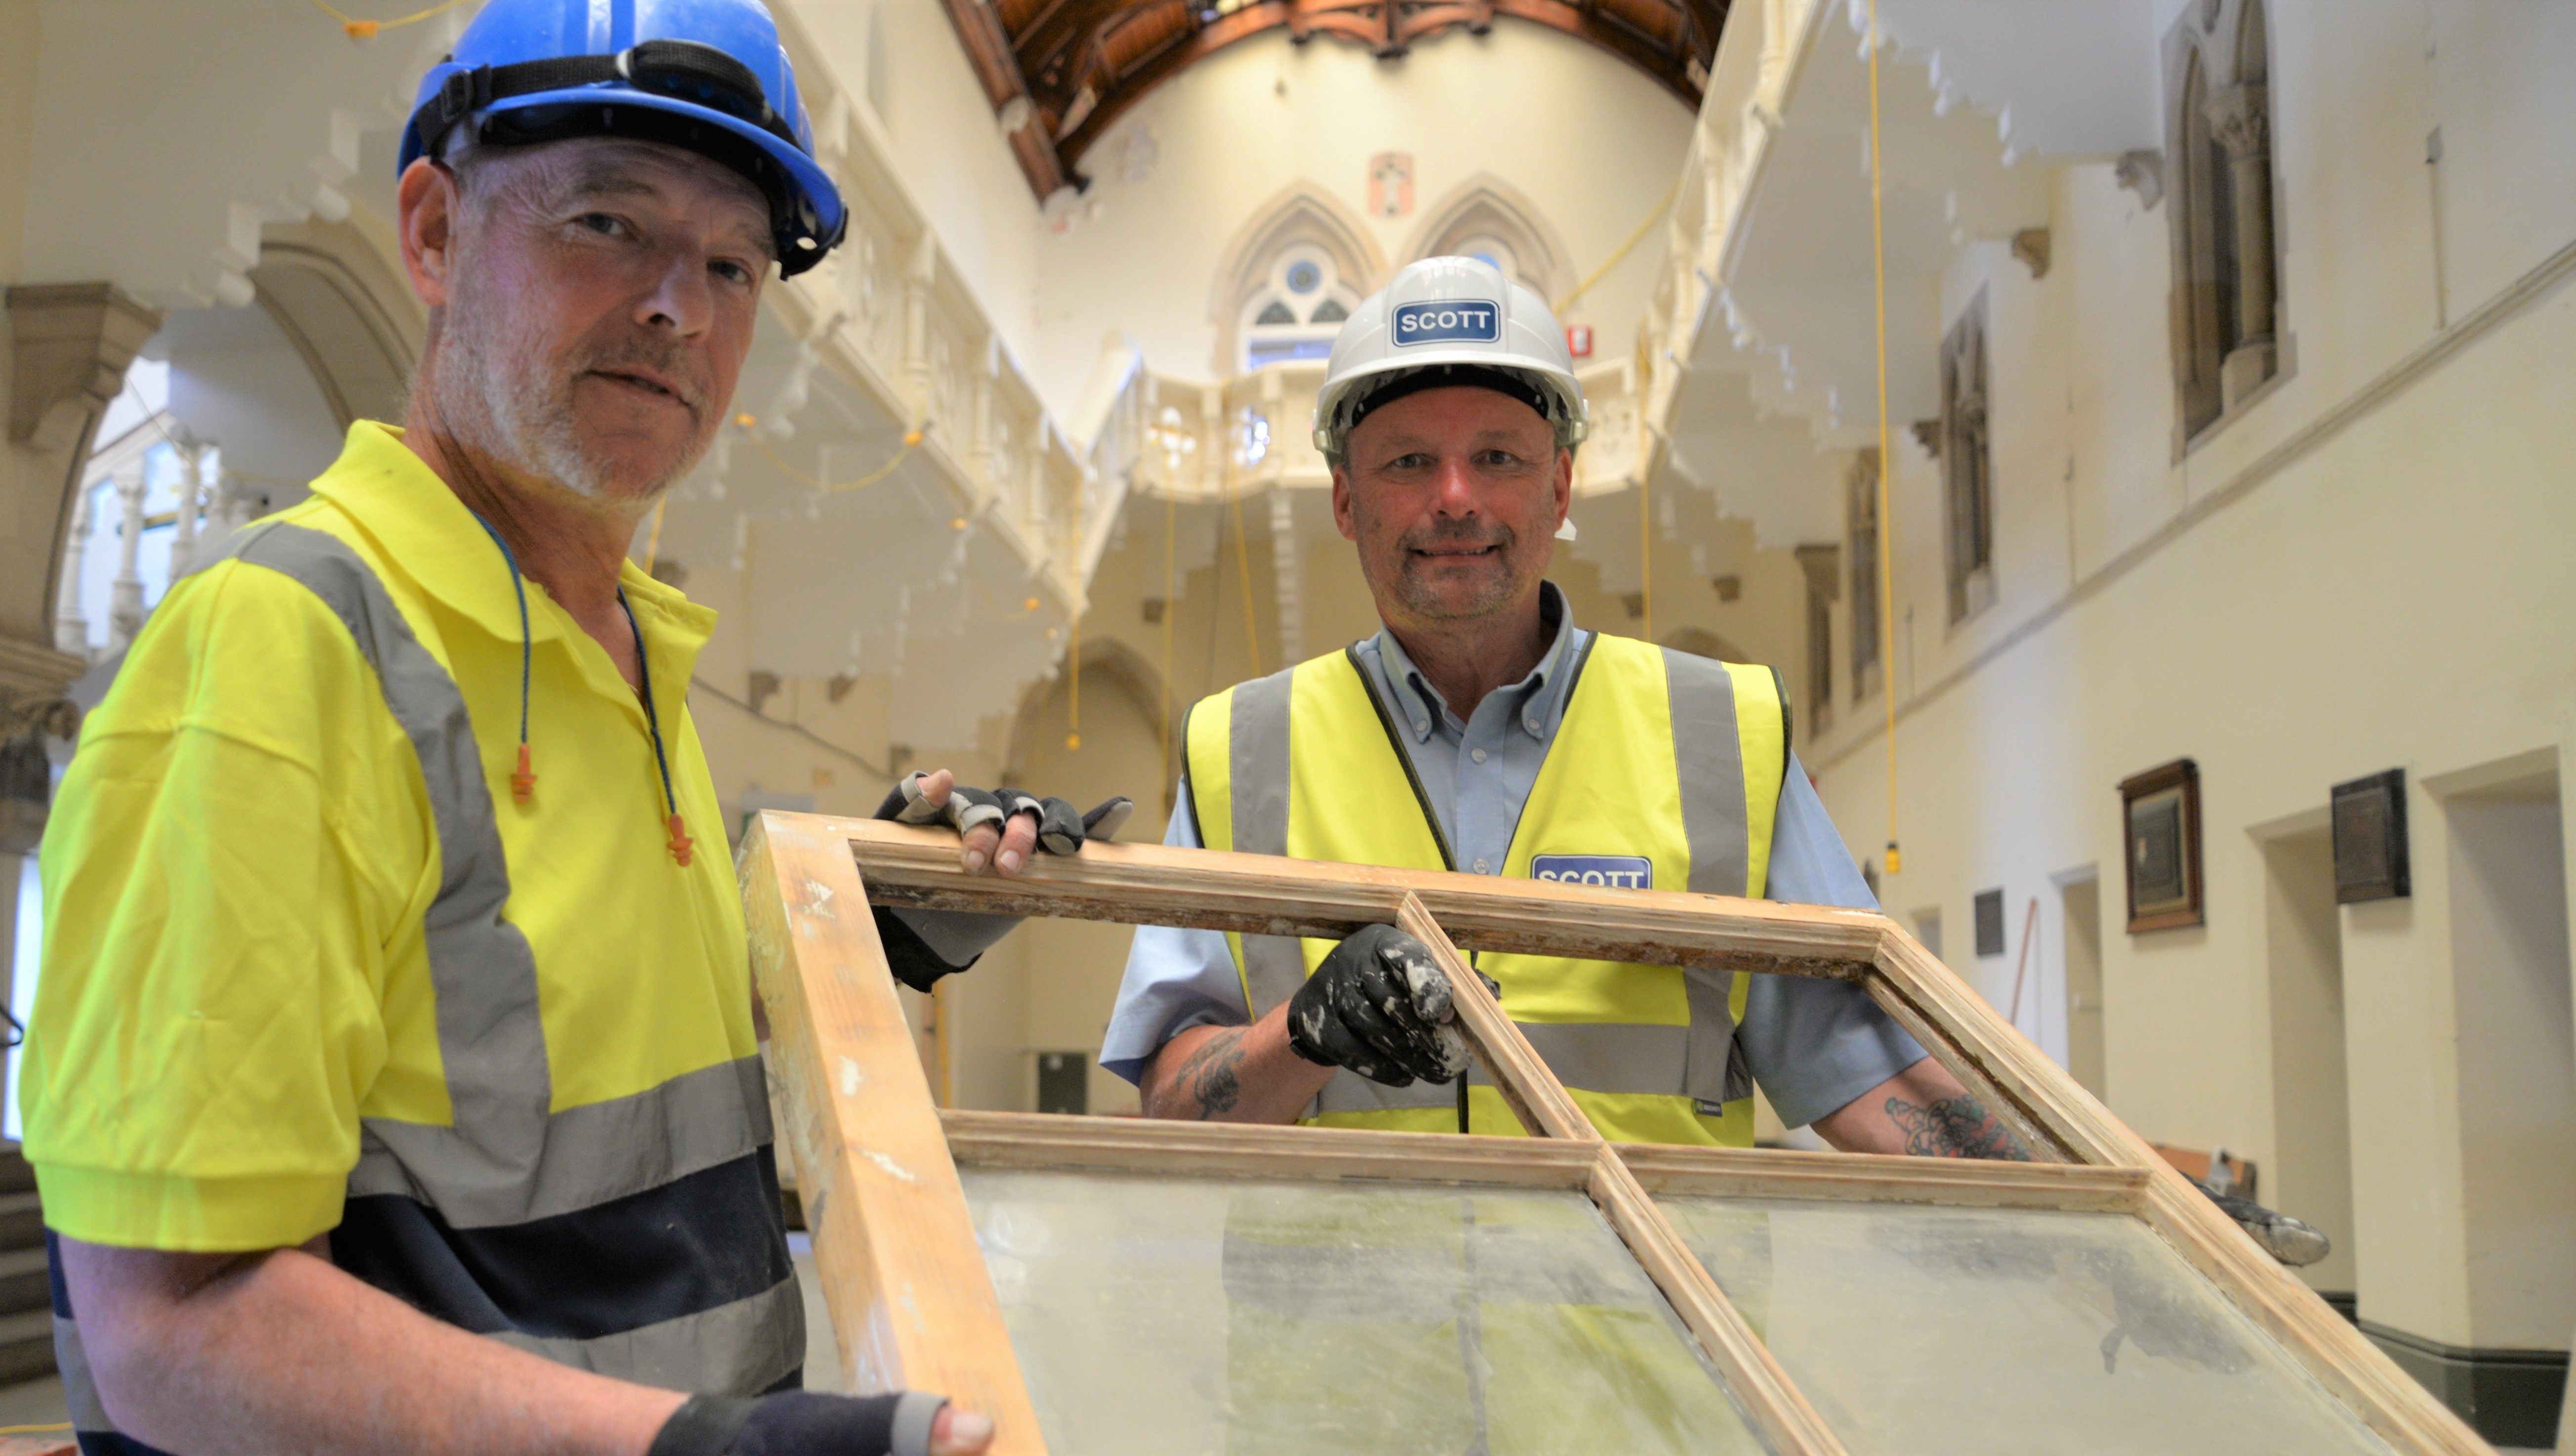 Cardigan based heritage carpenter Gary Davies (left) and Leighton Brown, Project Manager with Andrew Scott Ltd with one of the original windows from the Georgian Villas. The Old College features 664 windows, set in stone, steel and wooden frames.